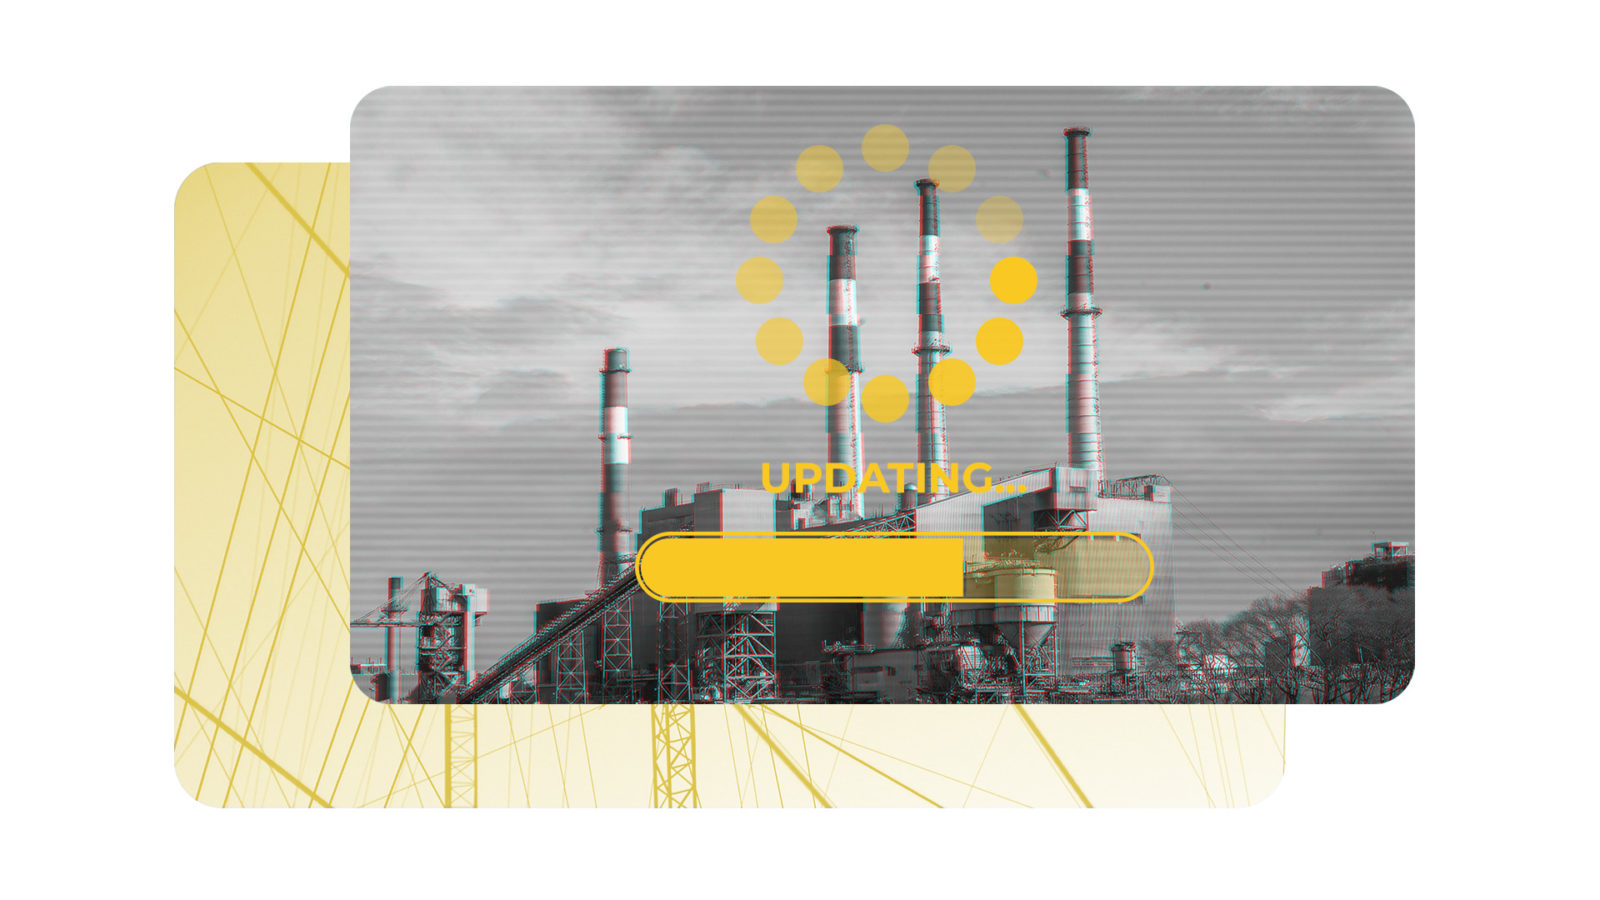 Two overlapping rectangular images. The bottom image is yellow and has intersecting thin lines. The top image is a power plant in black and white and has a yellow loading bar with text that says "updating..." The photos represent grid modernization.